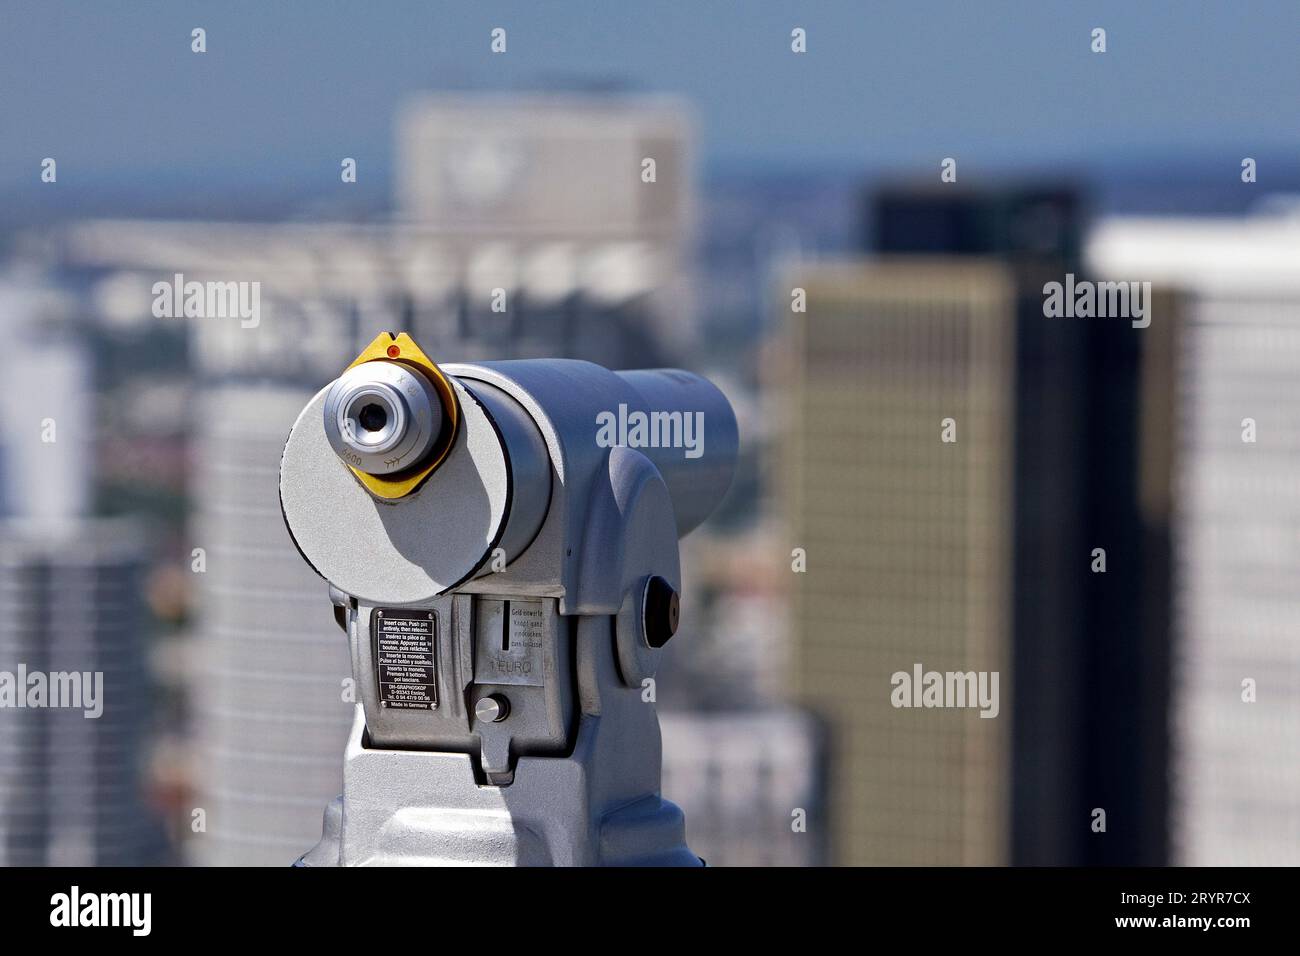 Coin operated telescope on the Maintower towards the financial district, Frankfurt am Main, Germany Stock Photo